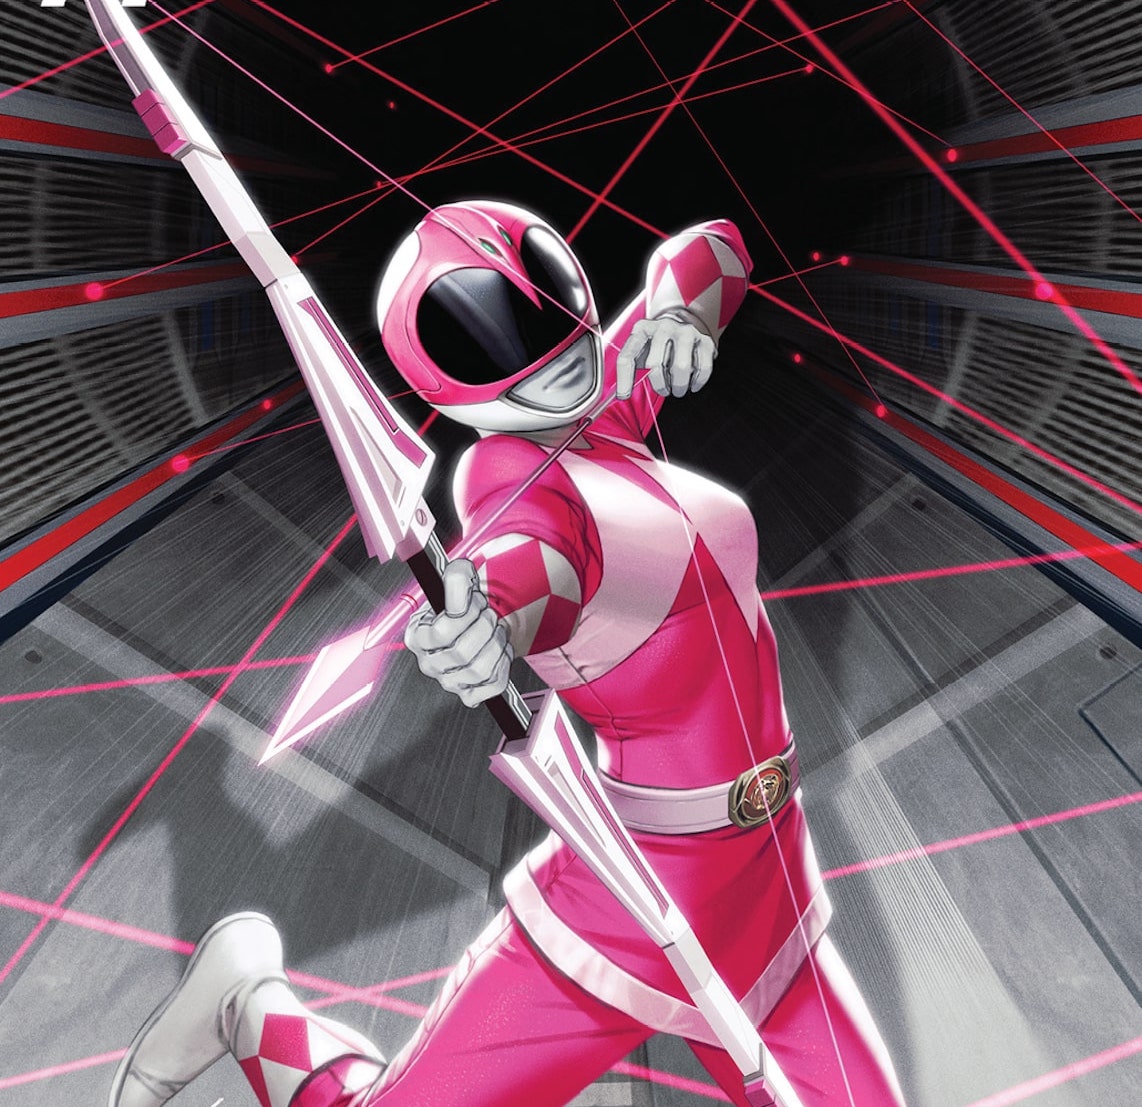 EXCLUSIVE BOOM! Preview: Mighty Morphin #20